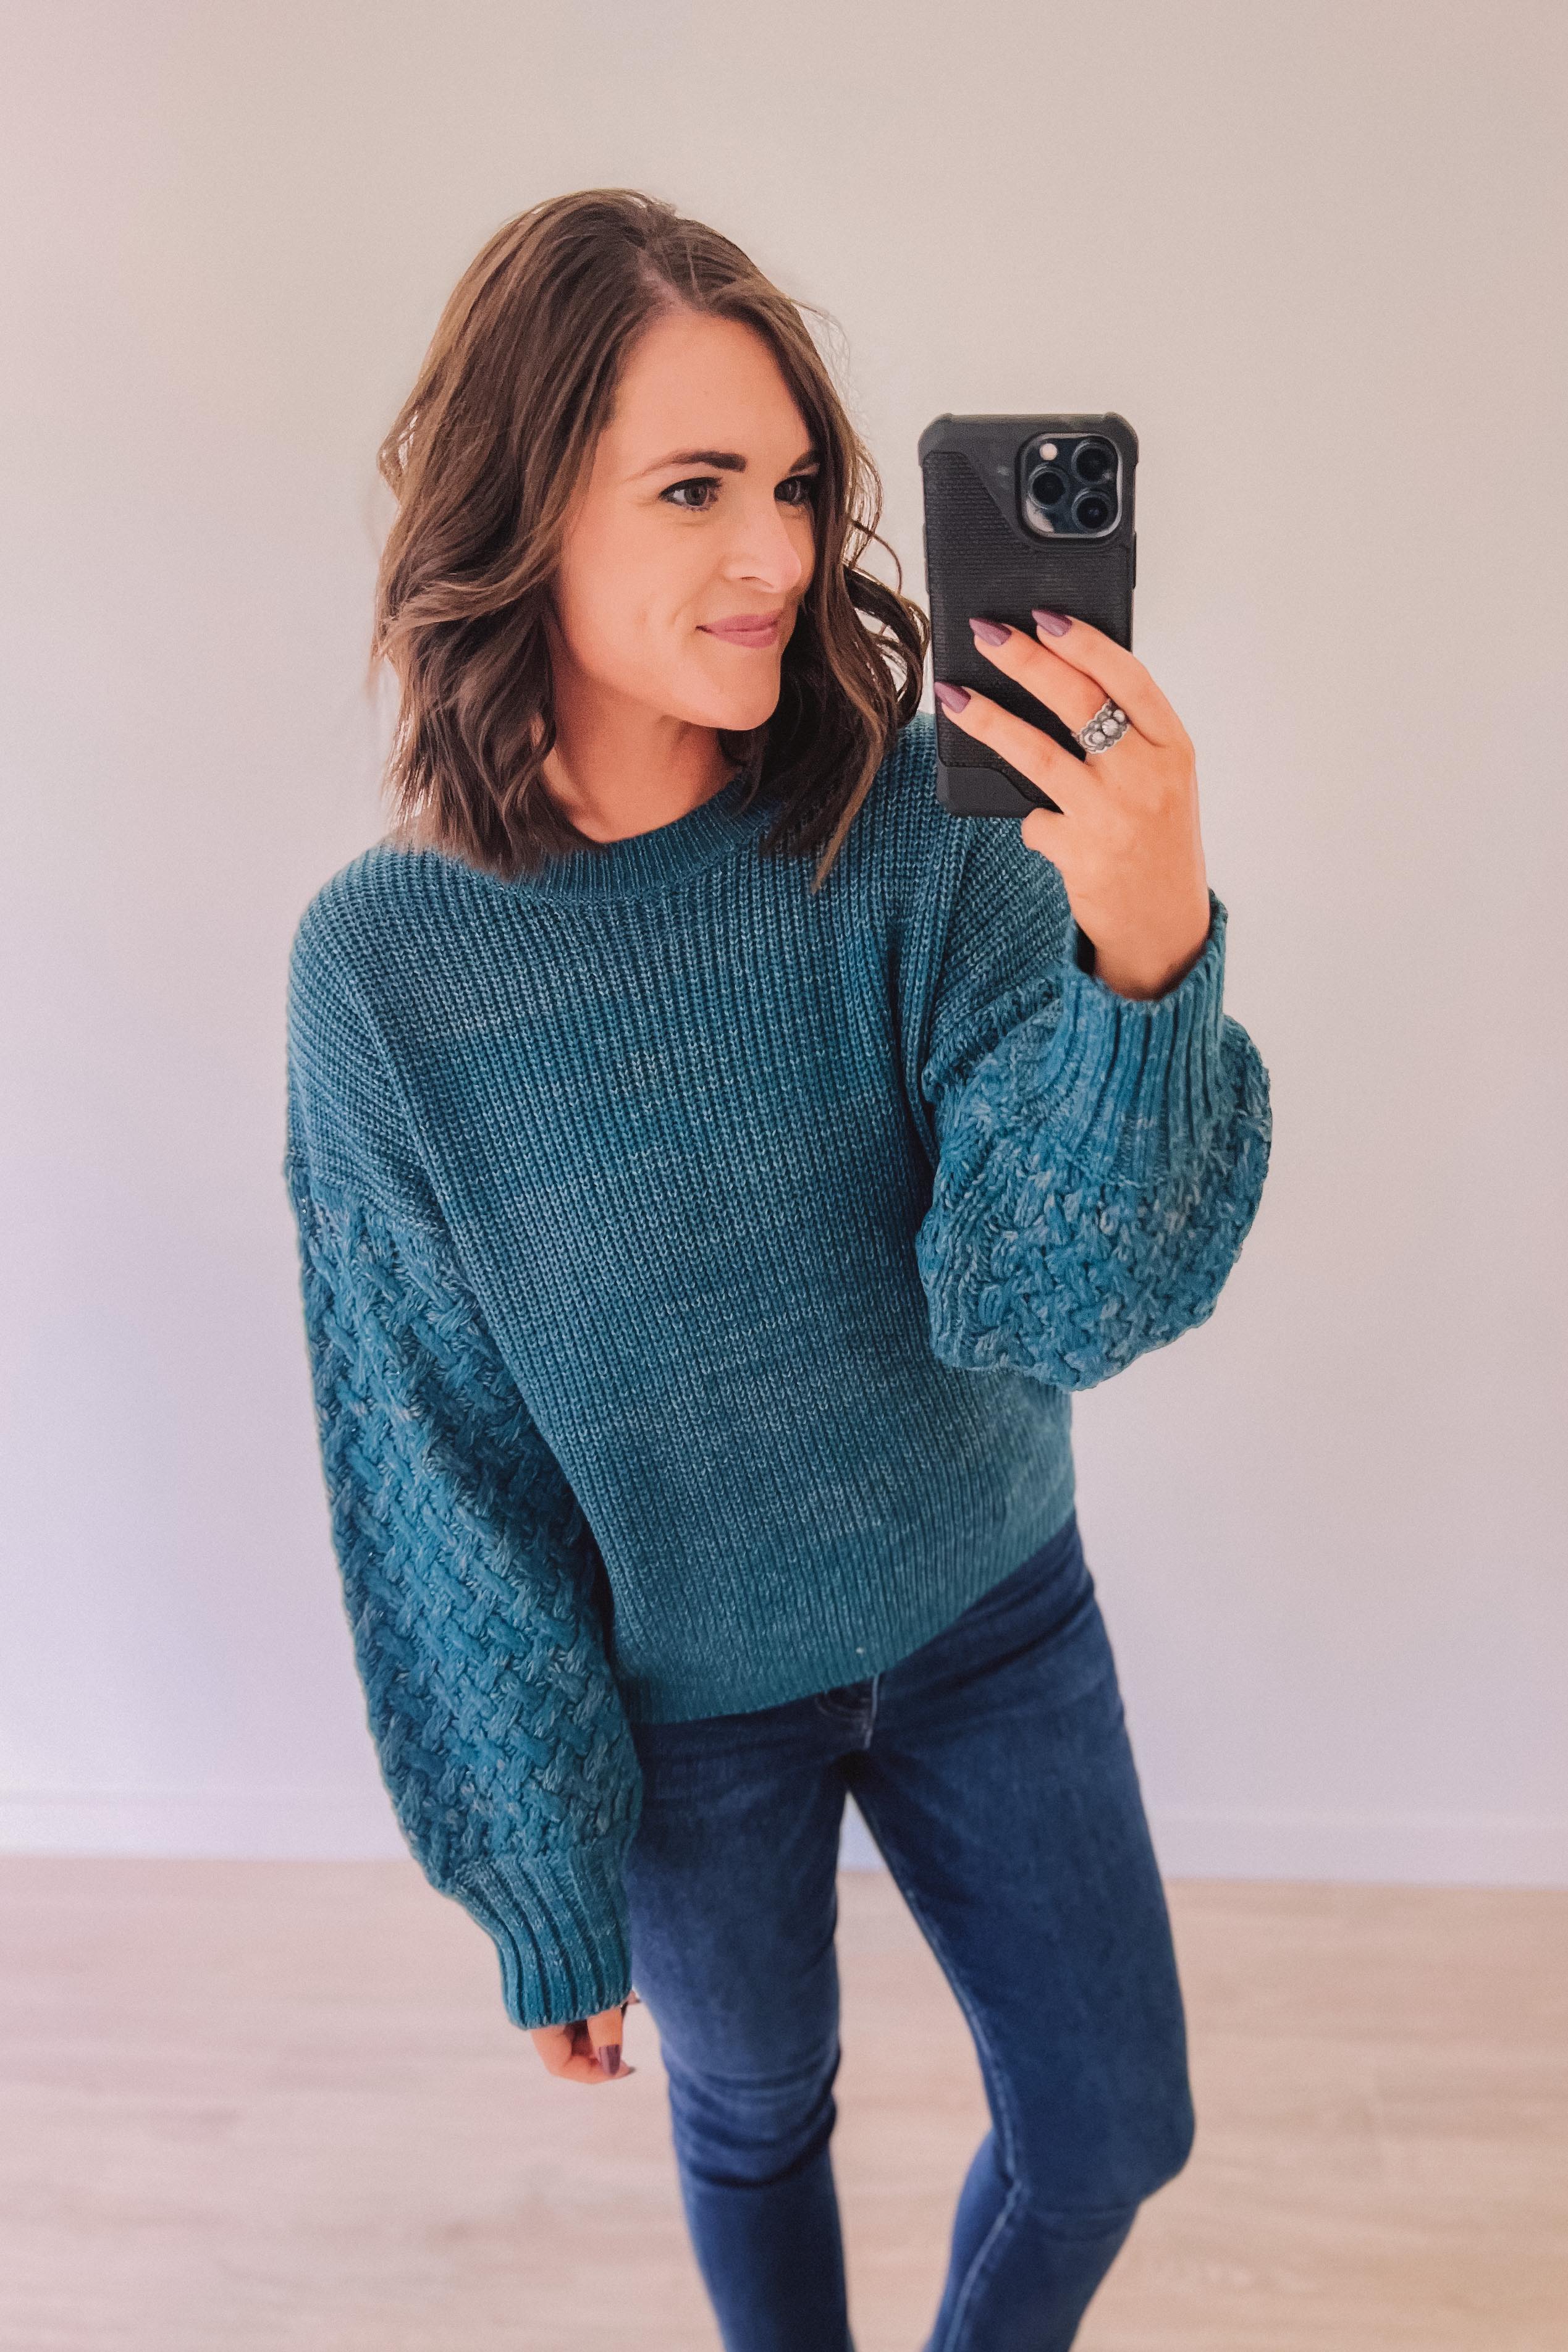 Weaved Together Sweater (Teal)